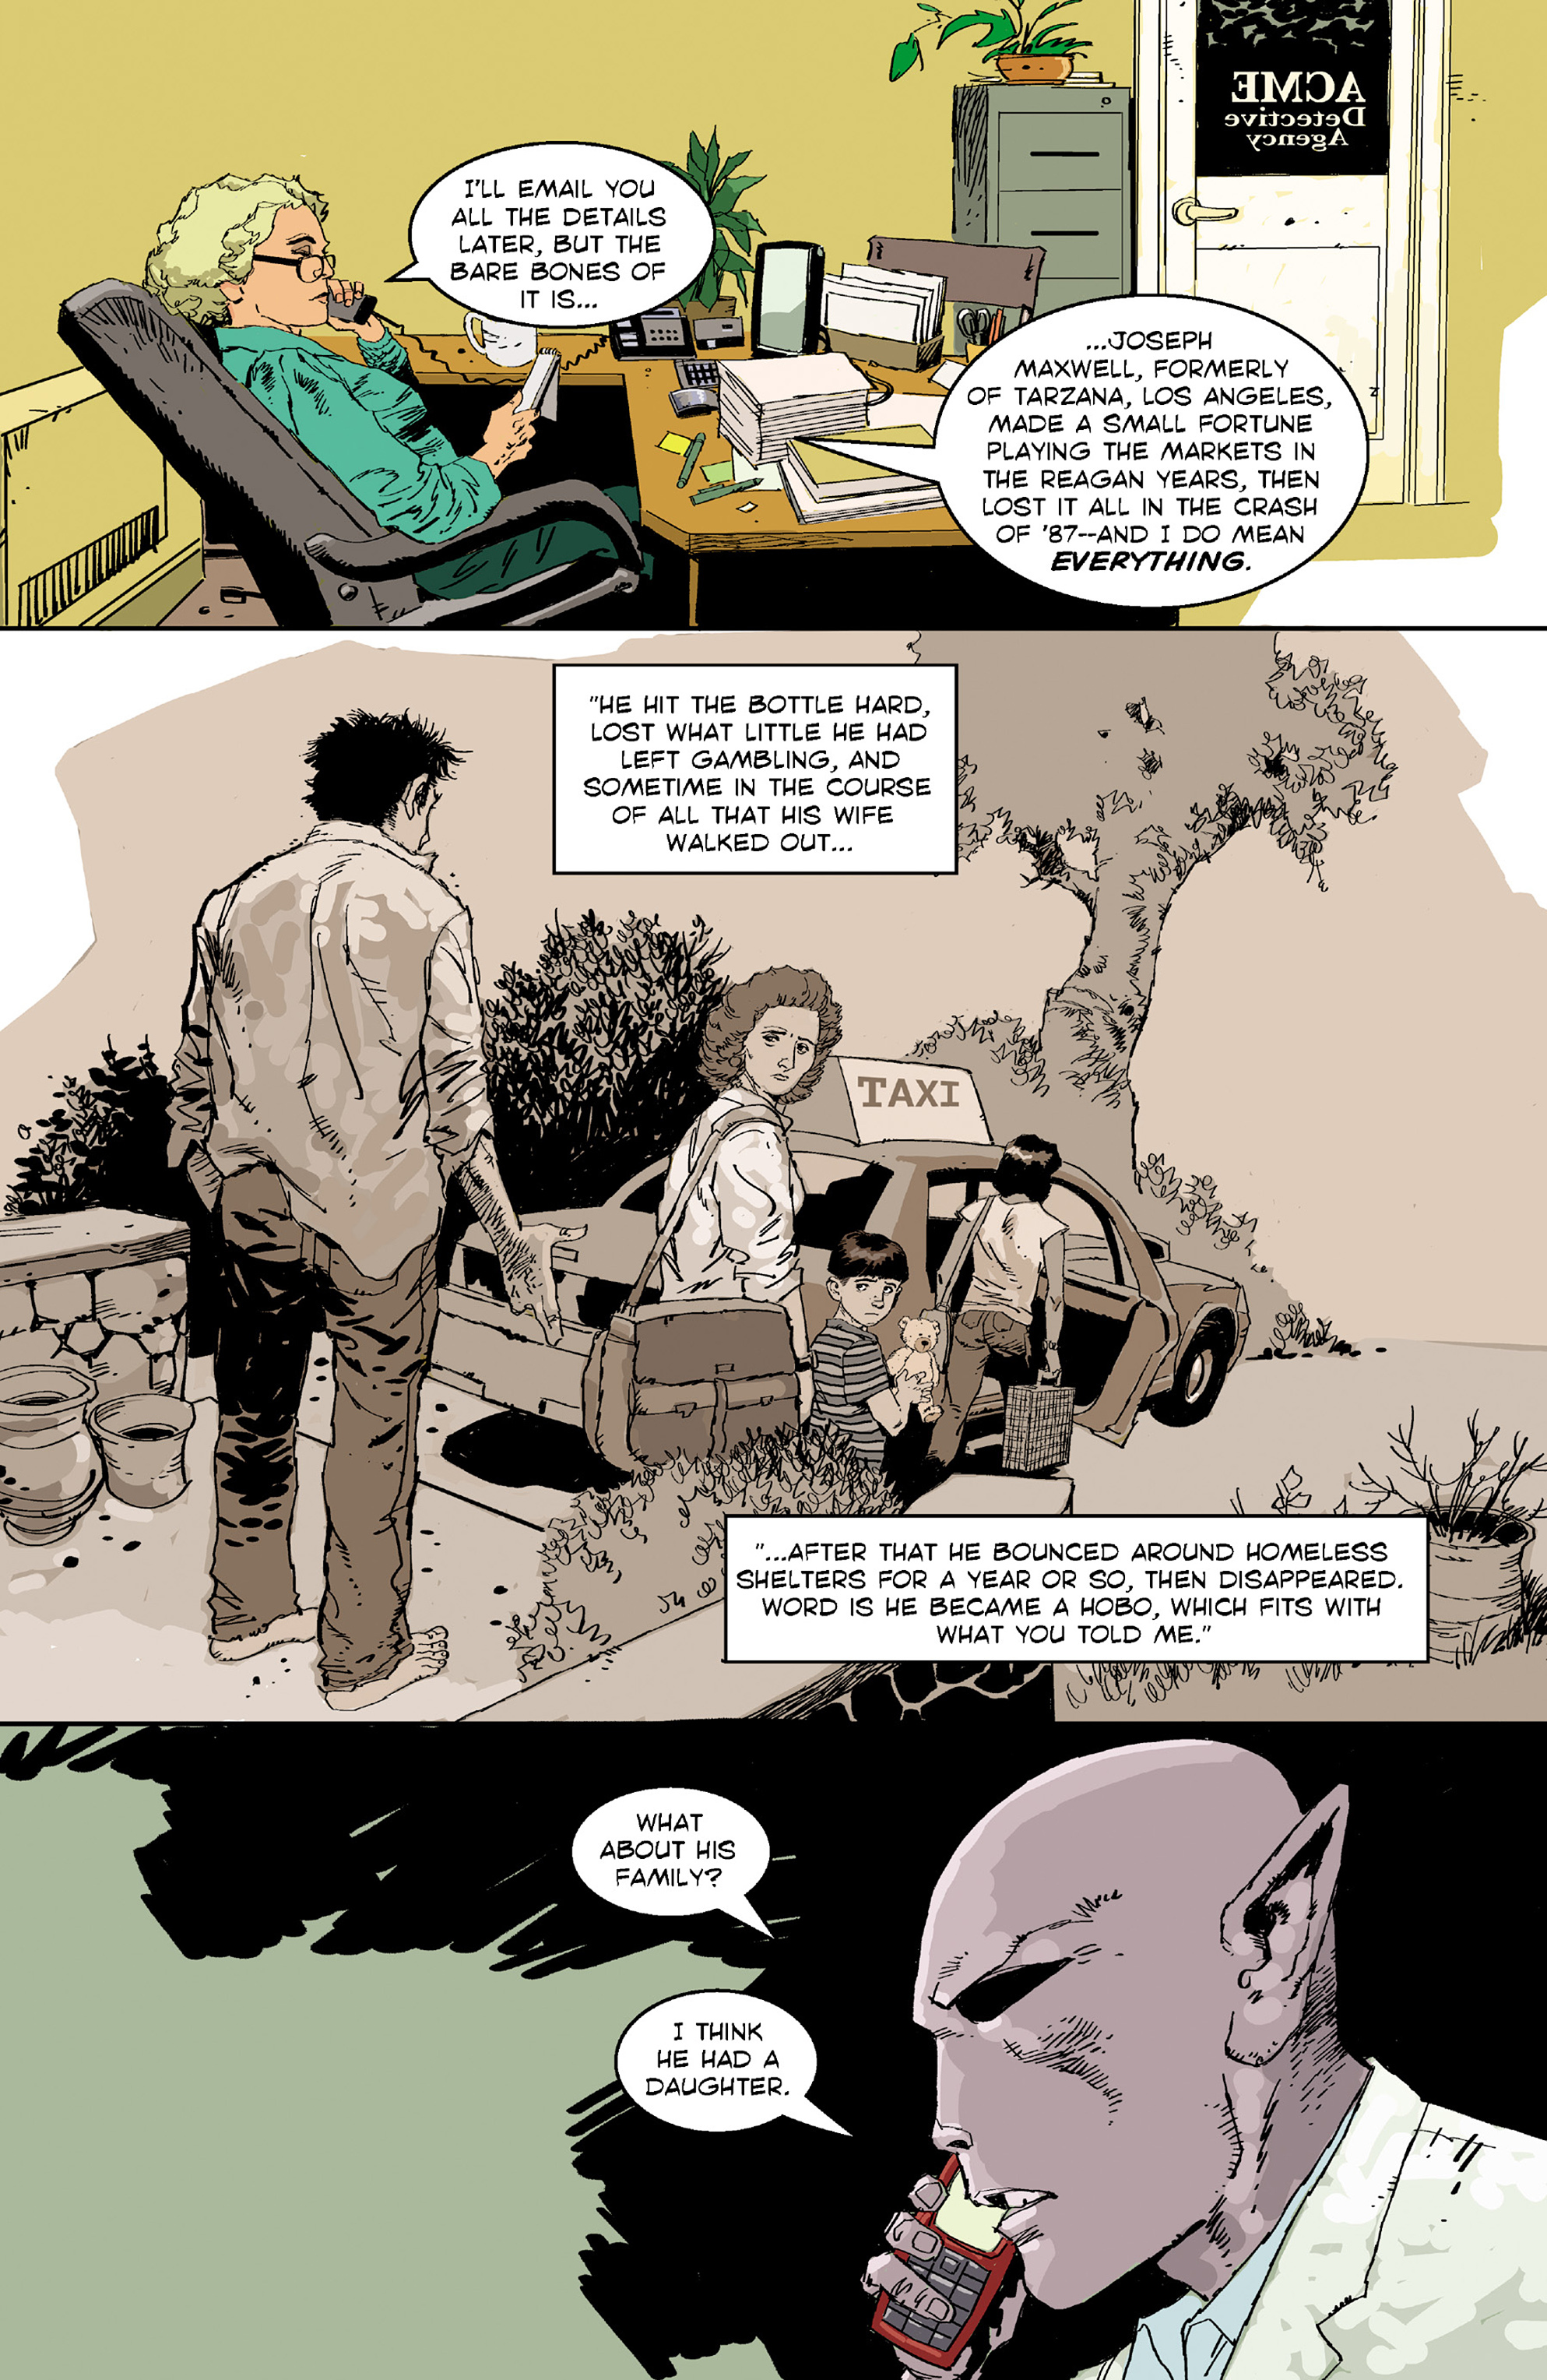 Resident Alien - The Man with No Name (2016): Chapter 4 - Page 3